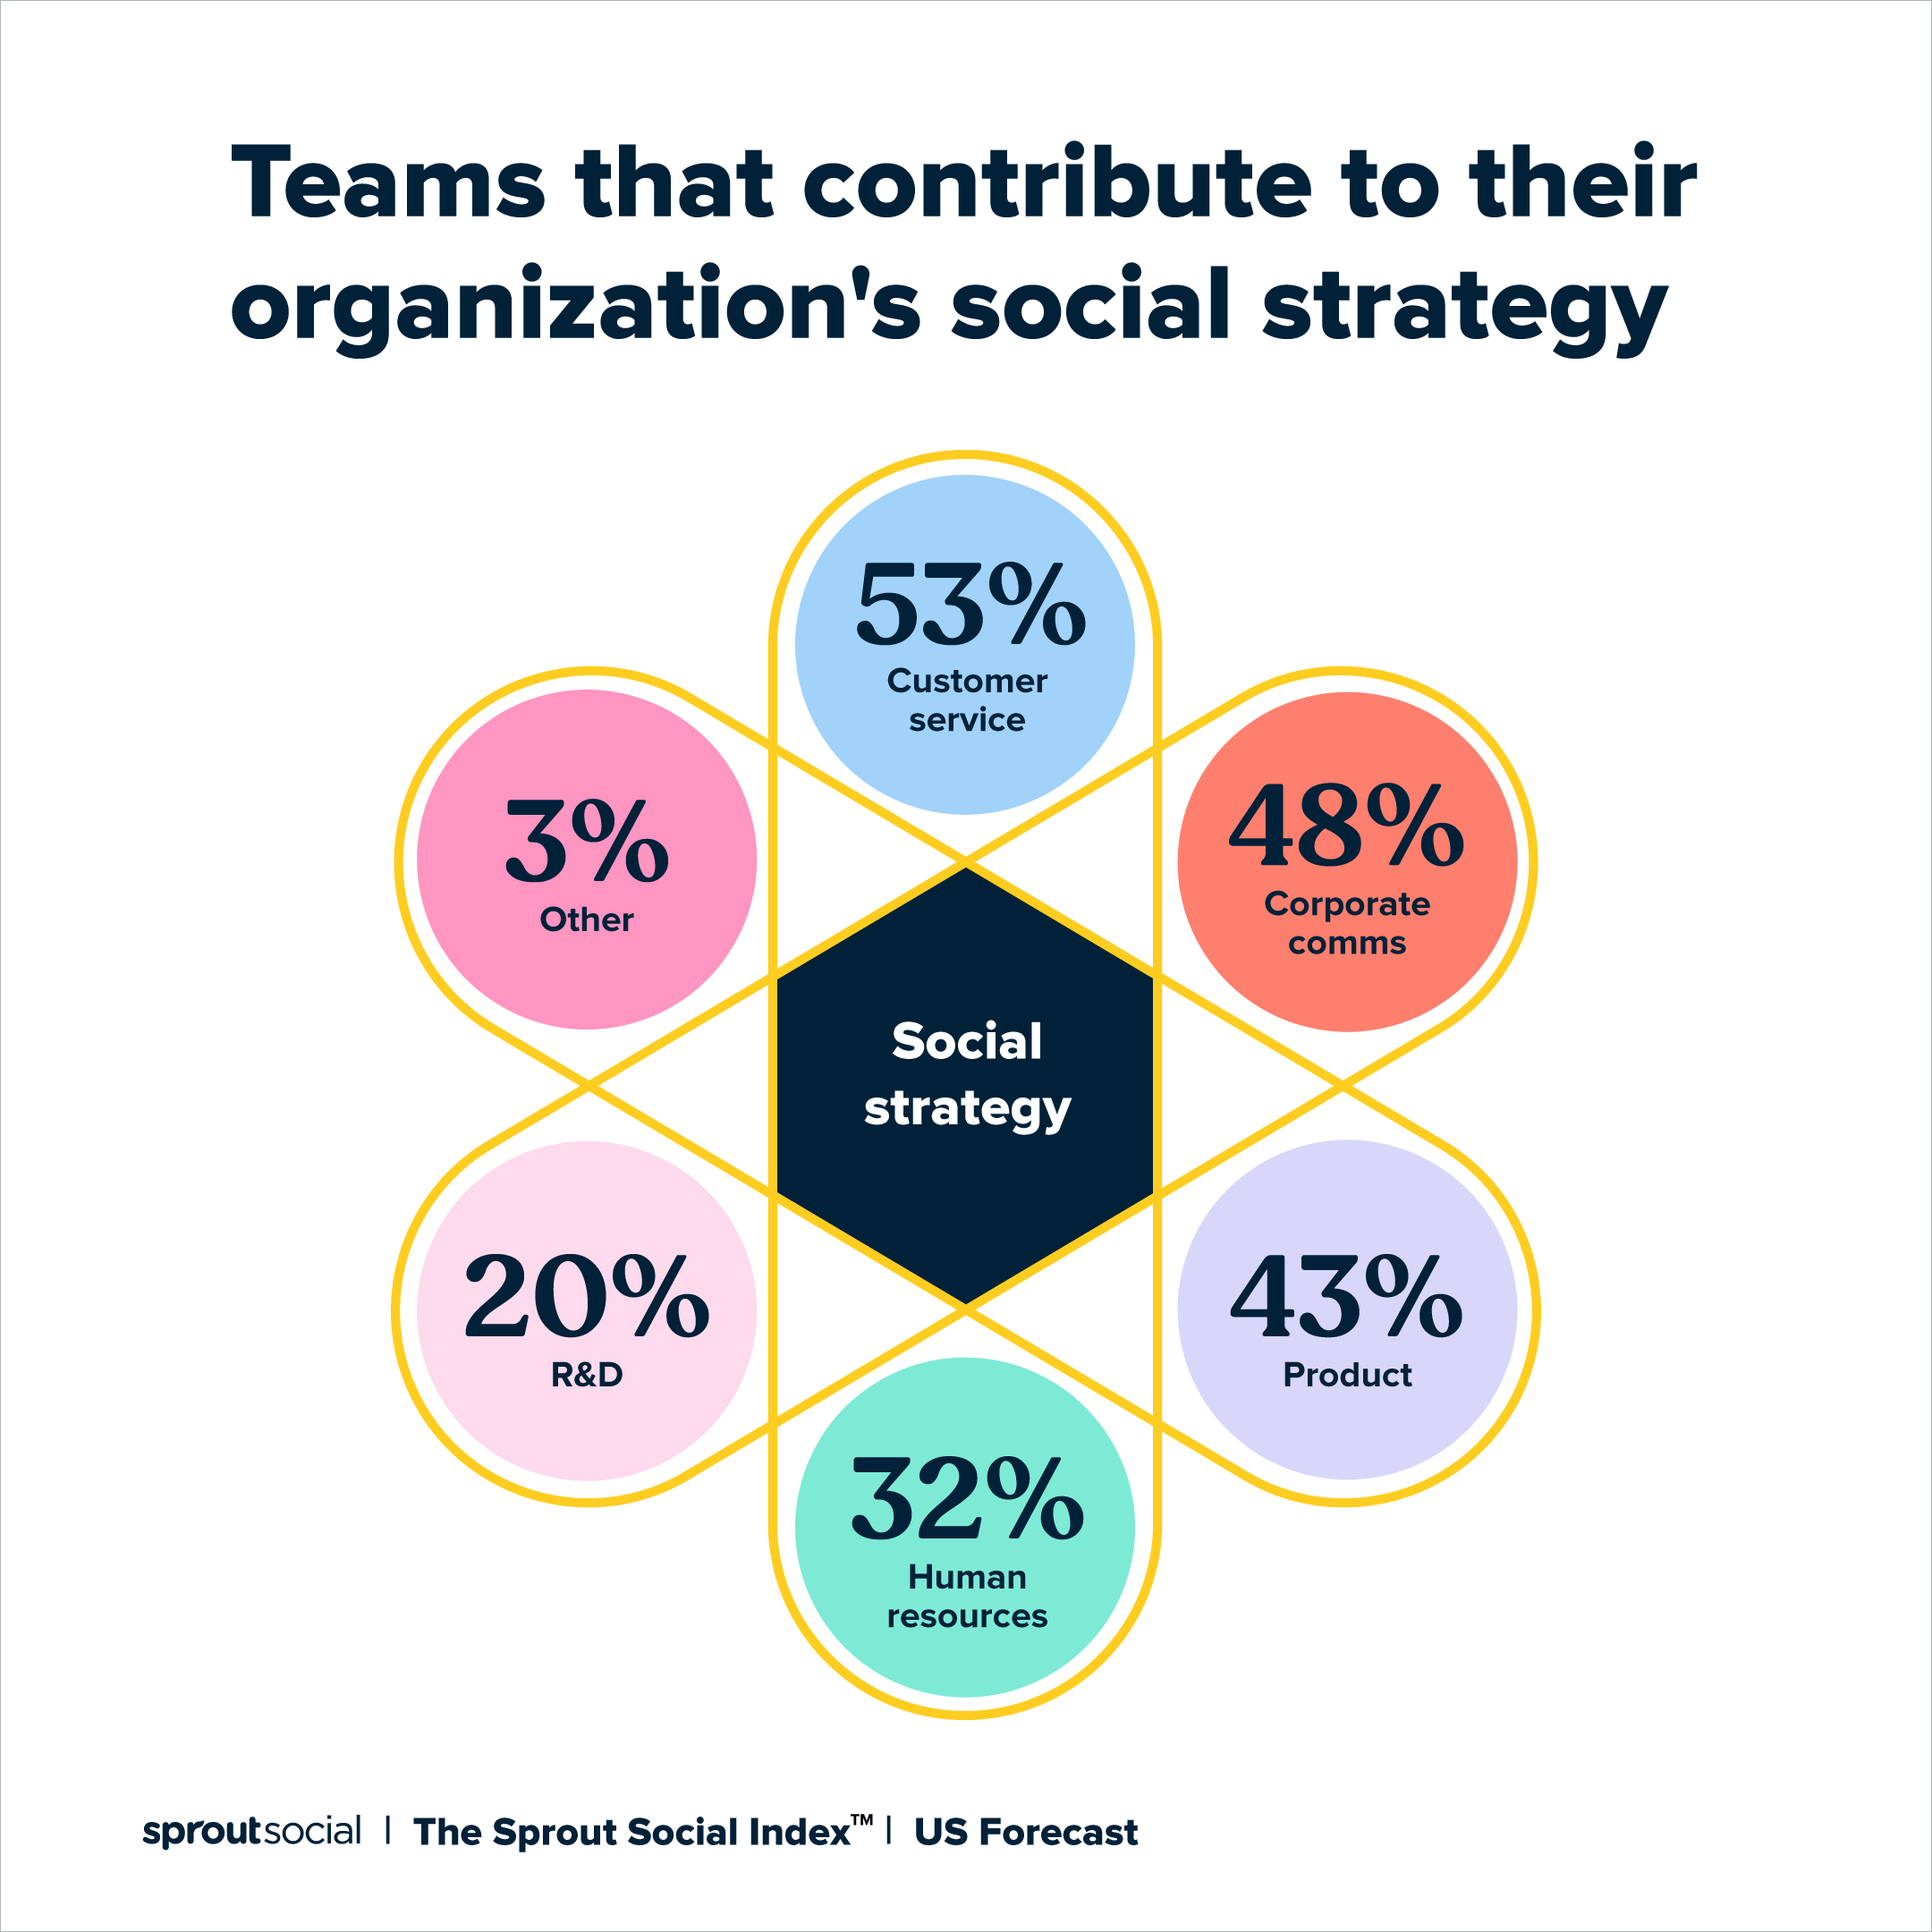 Chart showing "Teams that conrtibute to their organization's social strategy. 53% Customer Service, 48% corporate comms, 43% product, 32% human resources, 20% R&D, 3% Other."